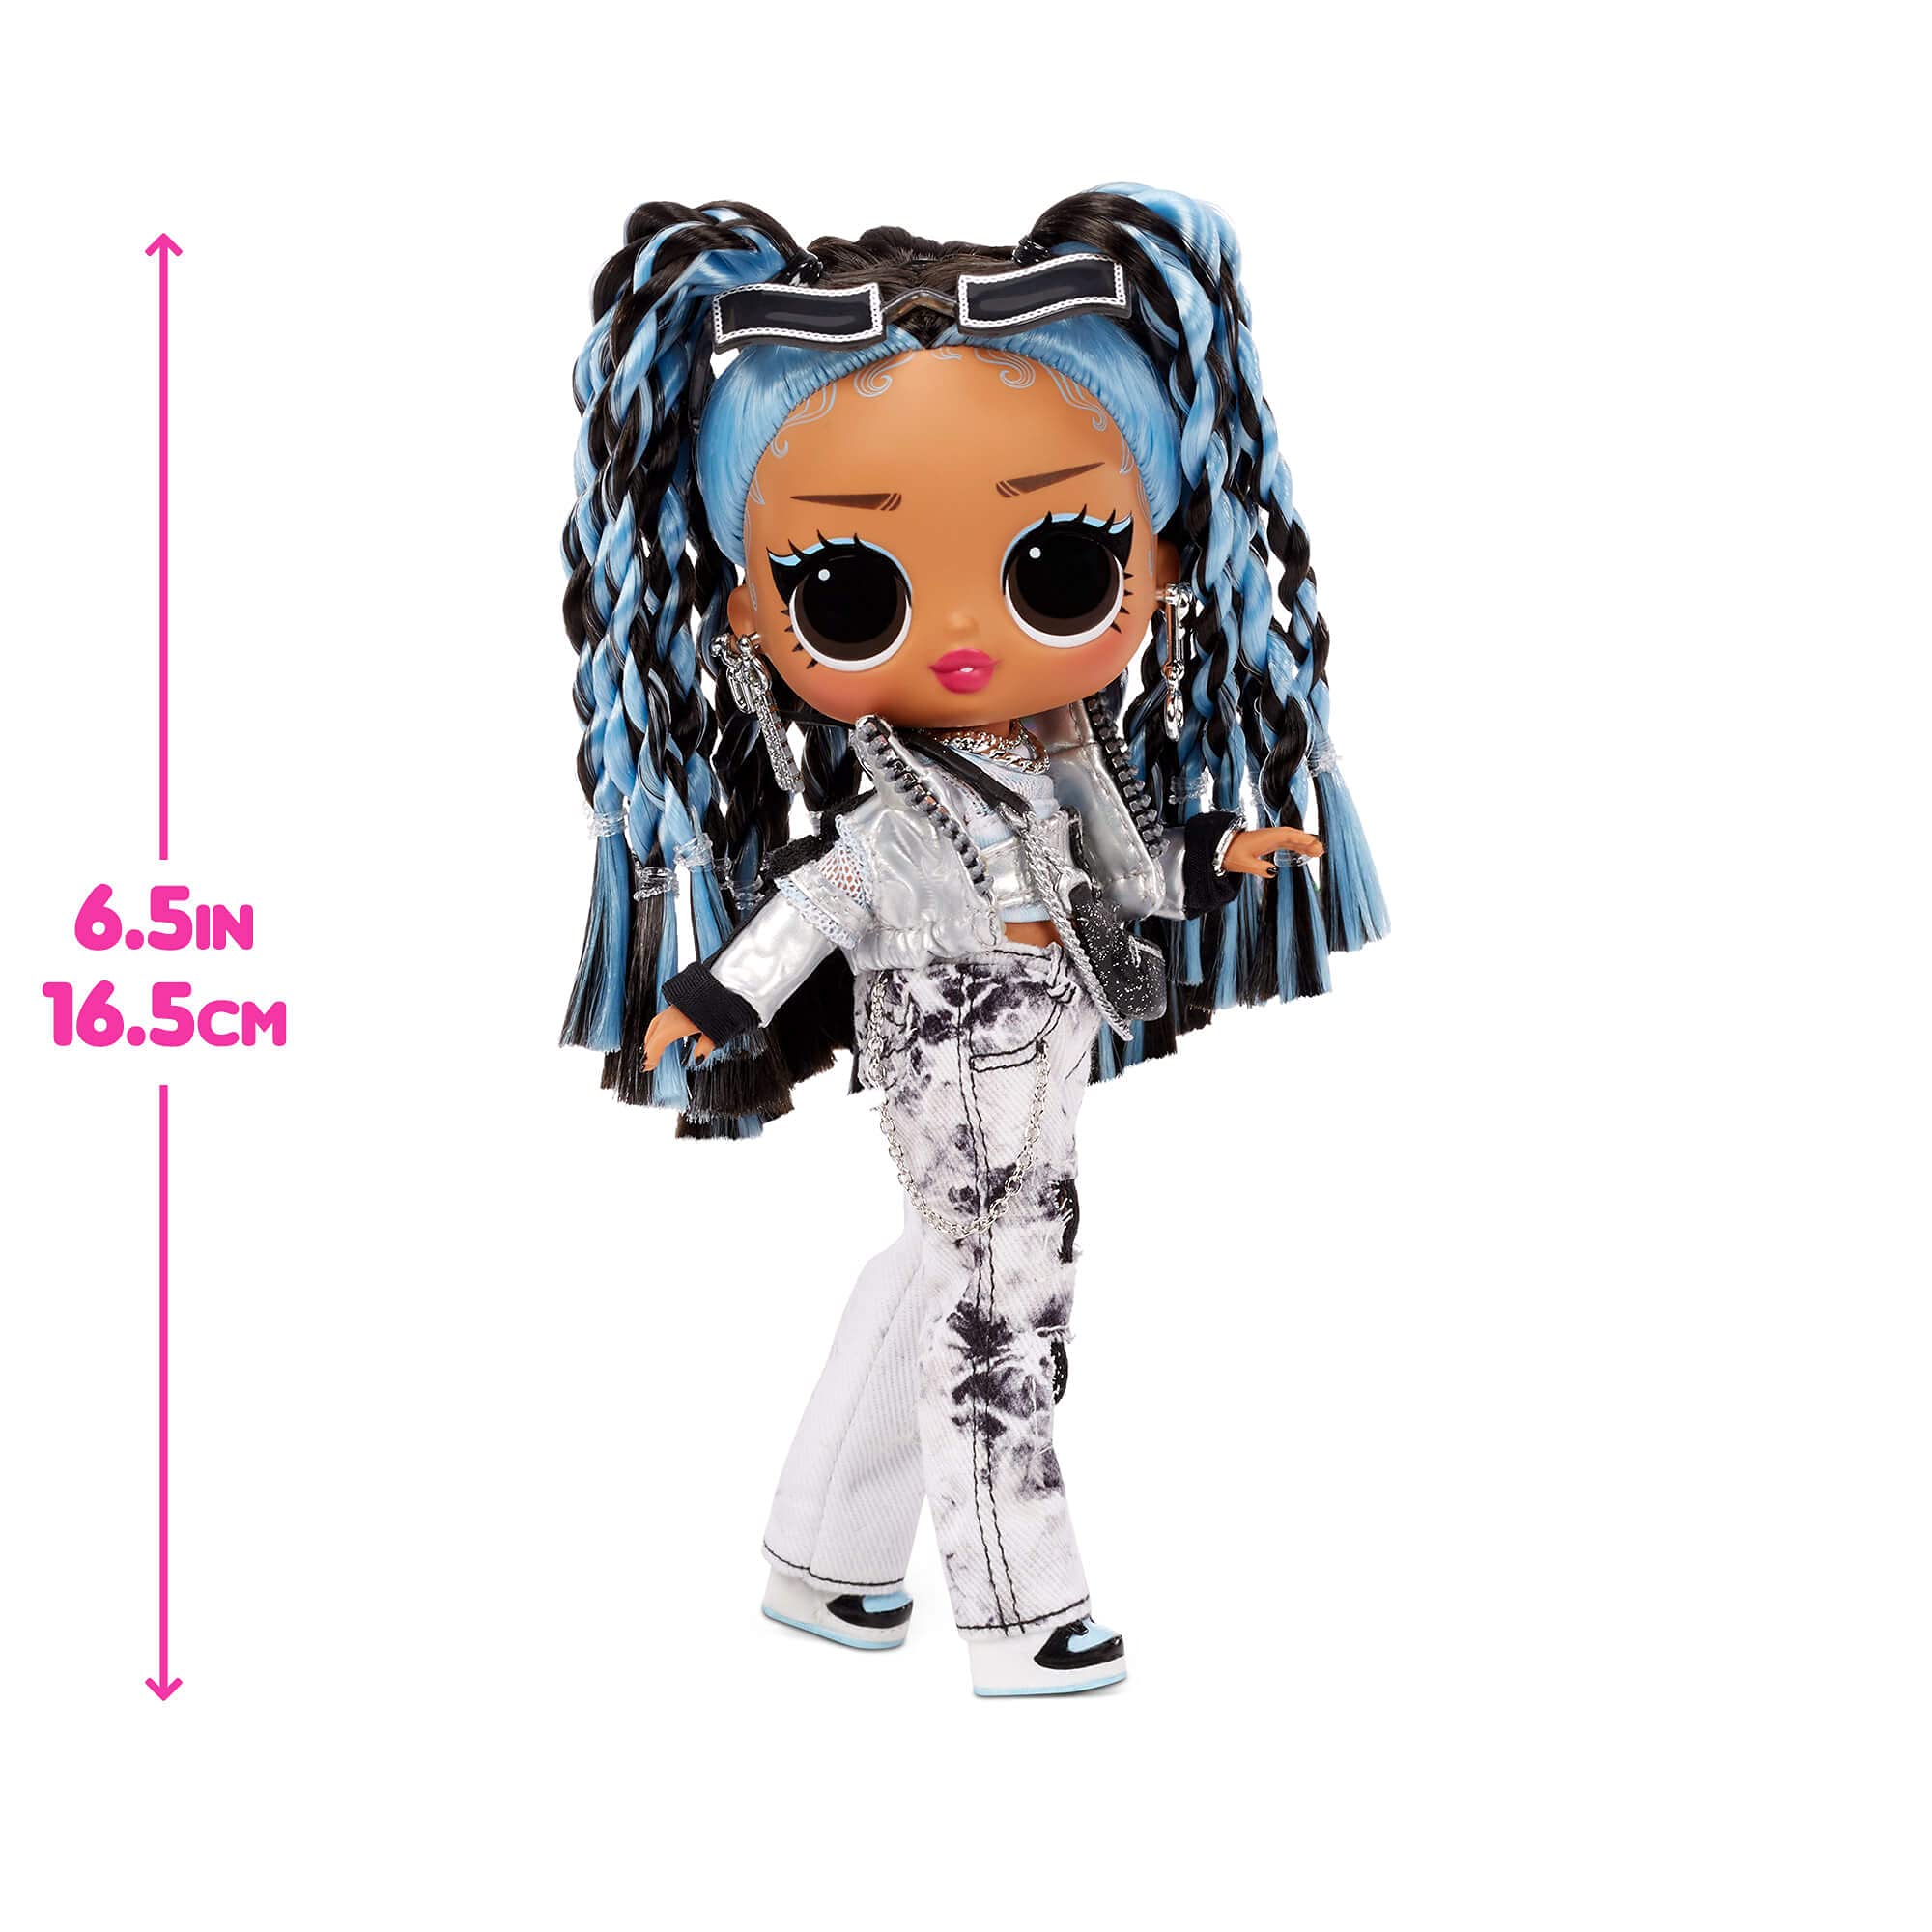 LOL Tweens Fashion Doll with 15 Surprises, Blue Hair, Including Stylish Outfit & Accessories with Reusable Bedroom Playset - Gift for Kids, Ages 4+ Years, Multicolor, 6 inches